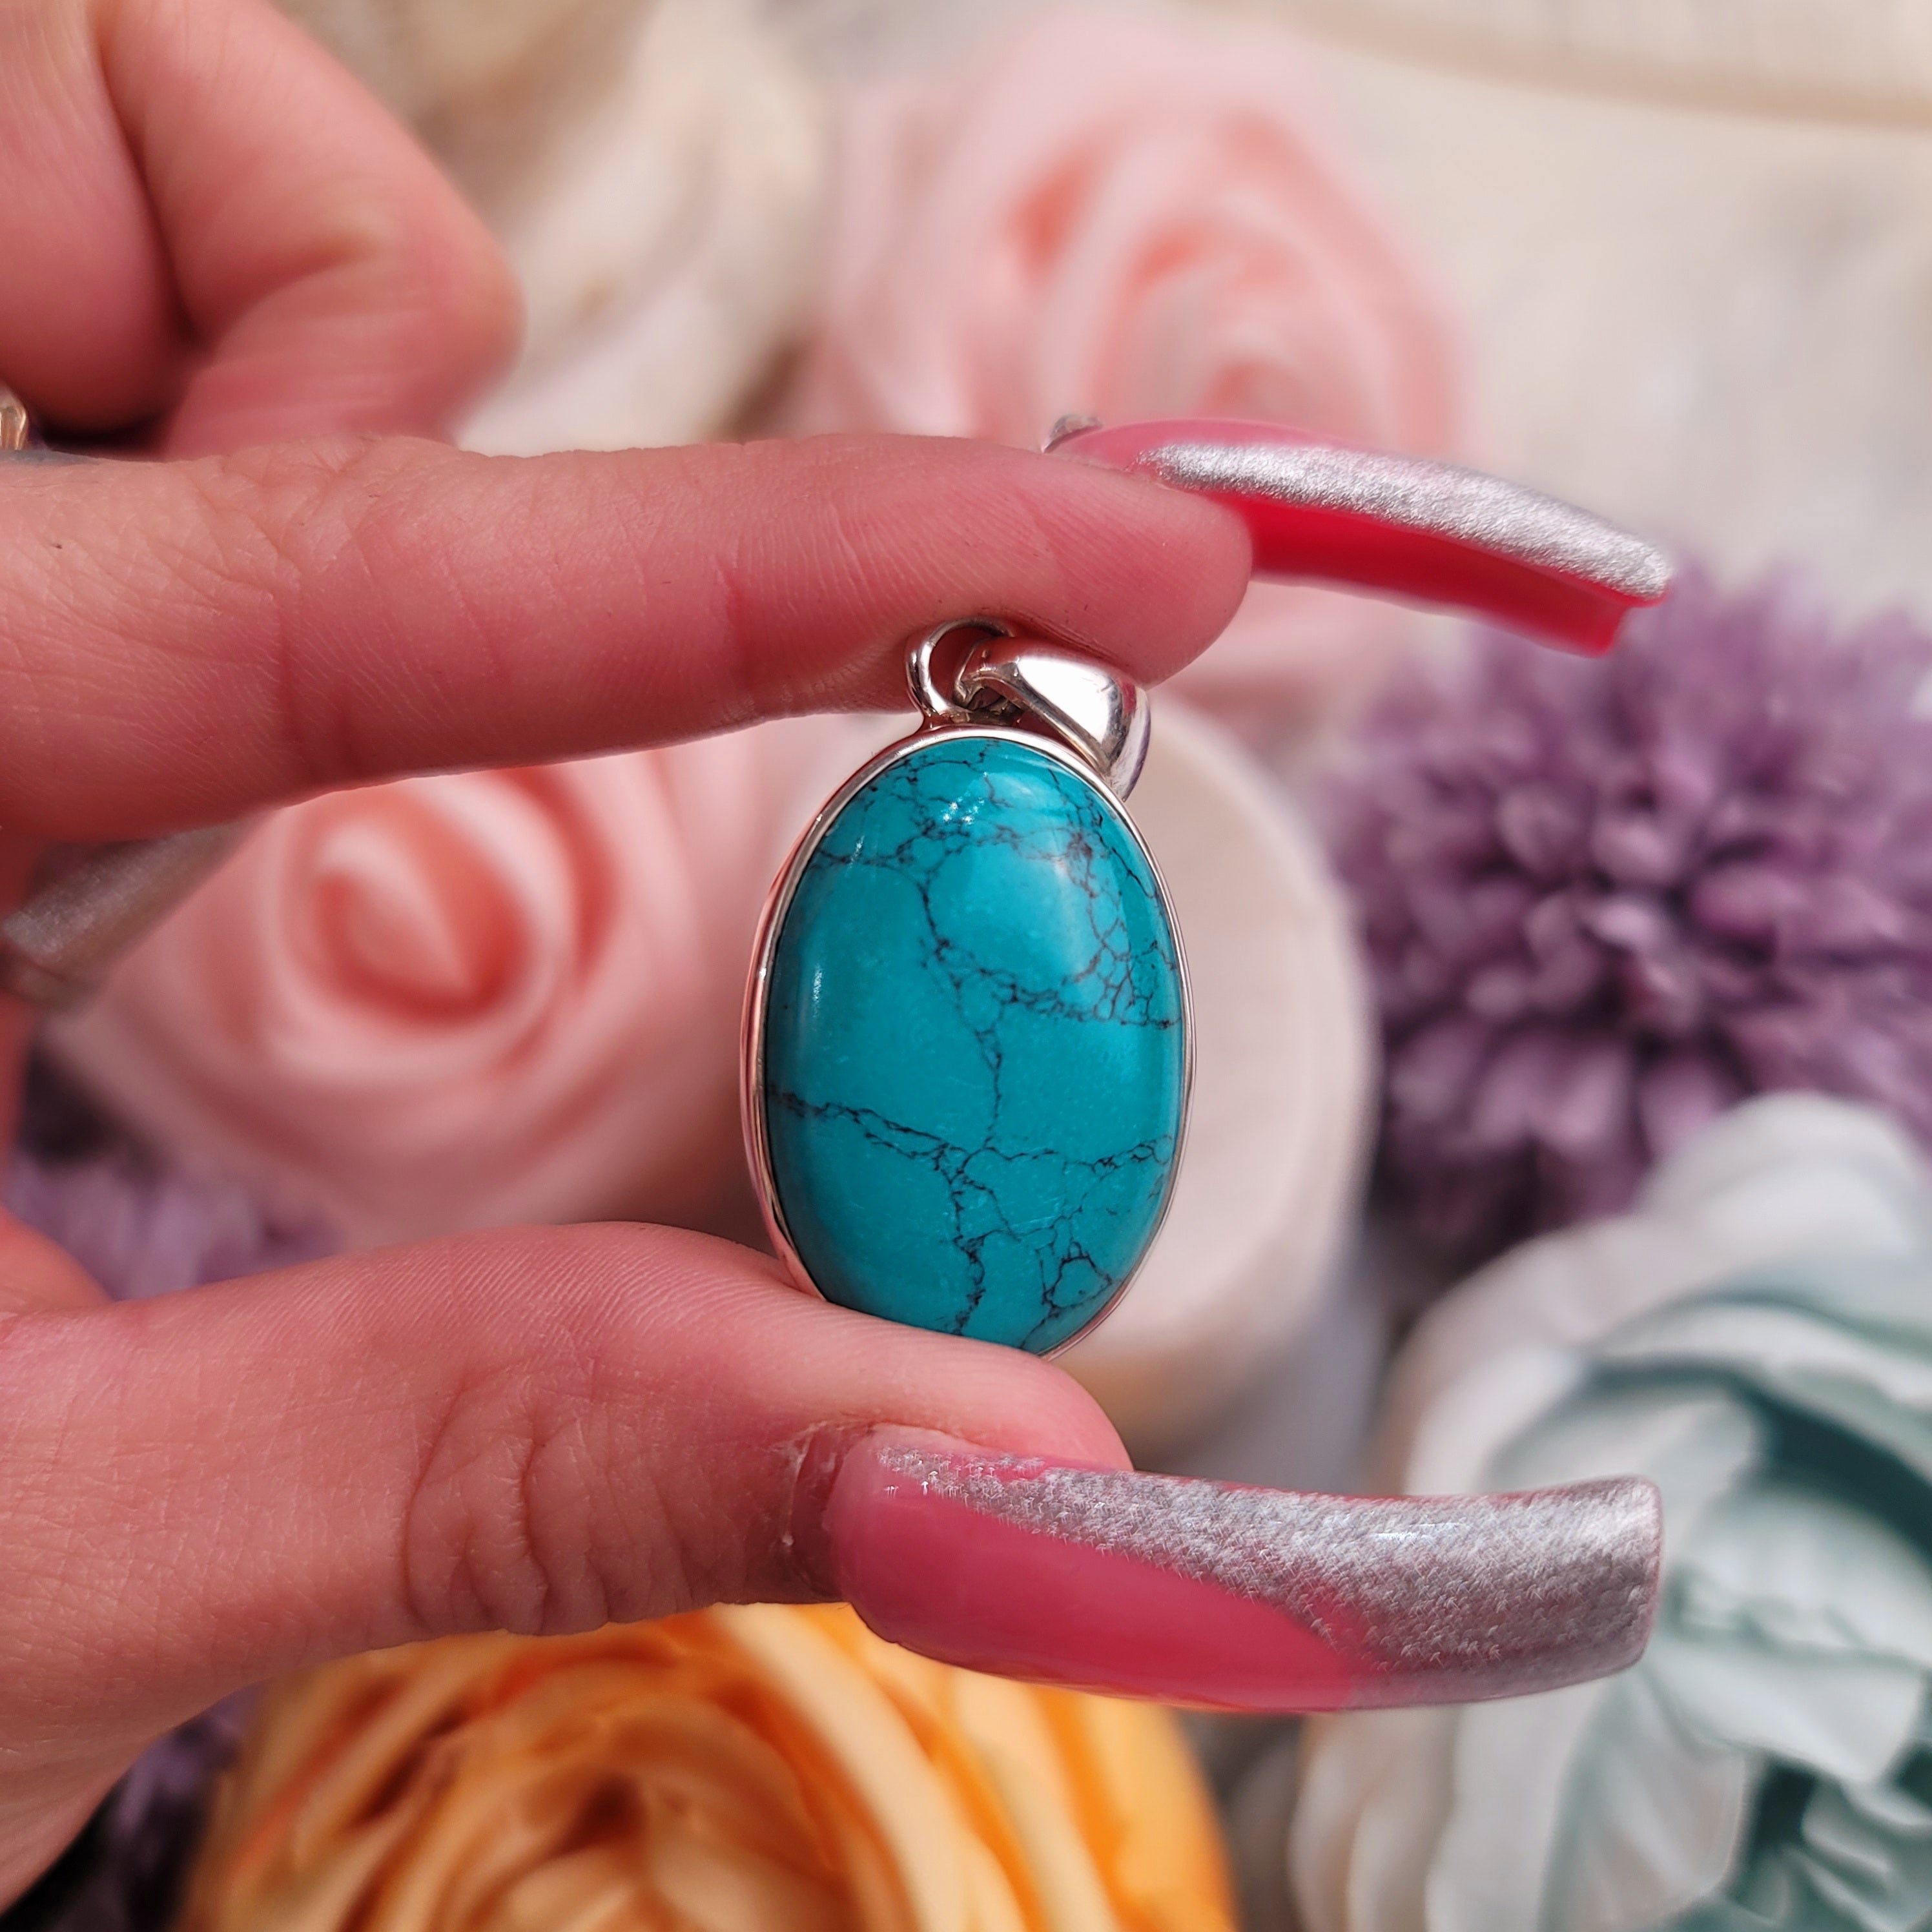 Tibetan Turquoise Pendant for Good Luck, Love, Prosperity and Protection